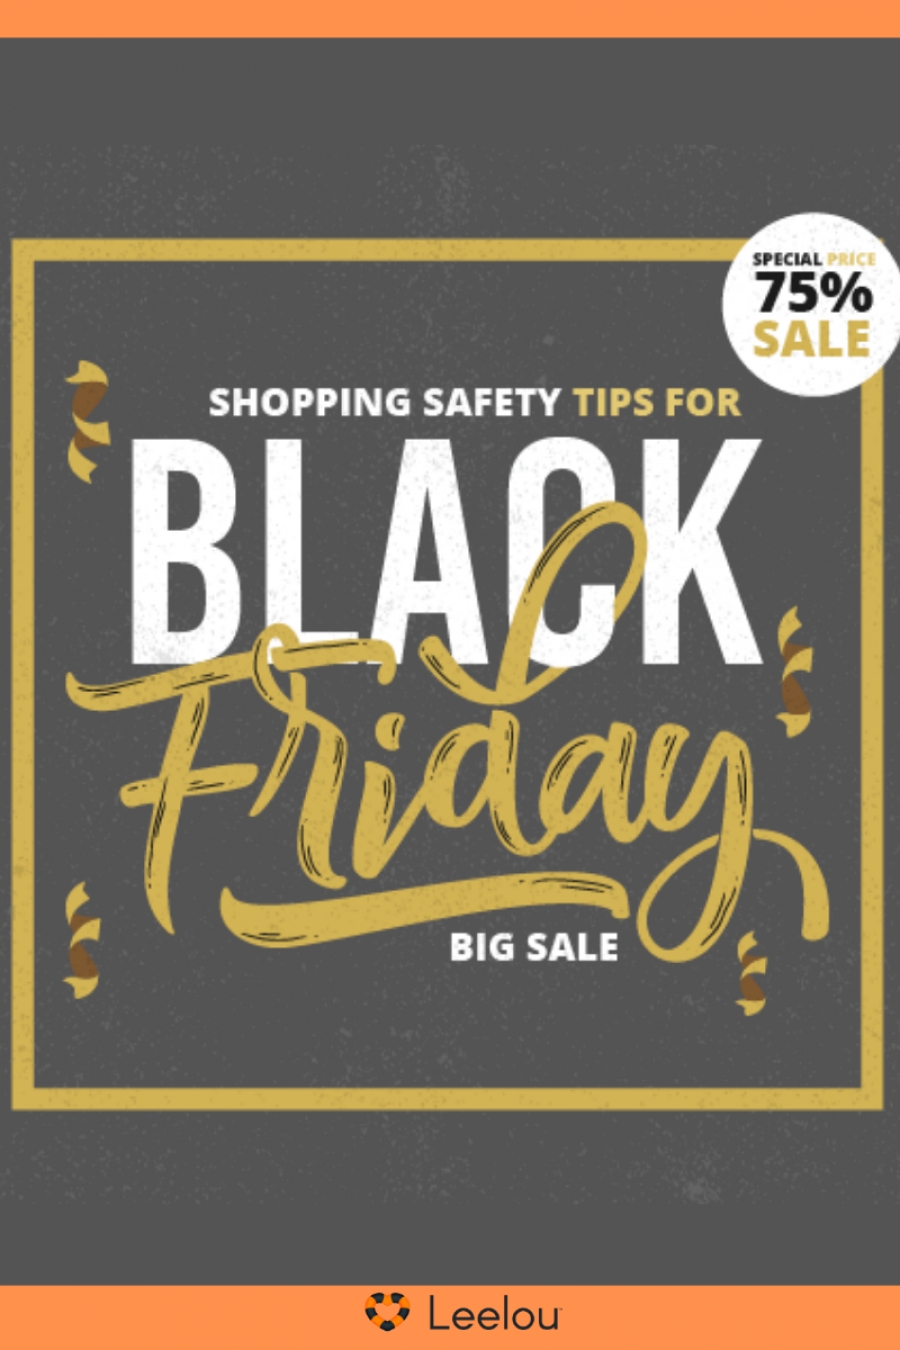 Black Friday Sale Shopping Safety Tips - Meet Leelou - Will The Switch Deal Stay After Black Friday